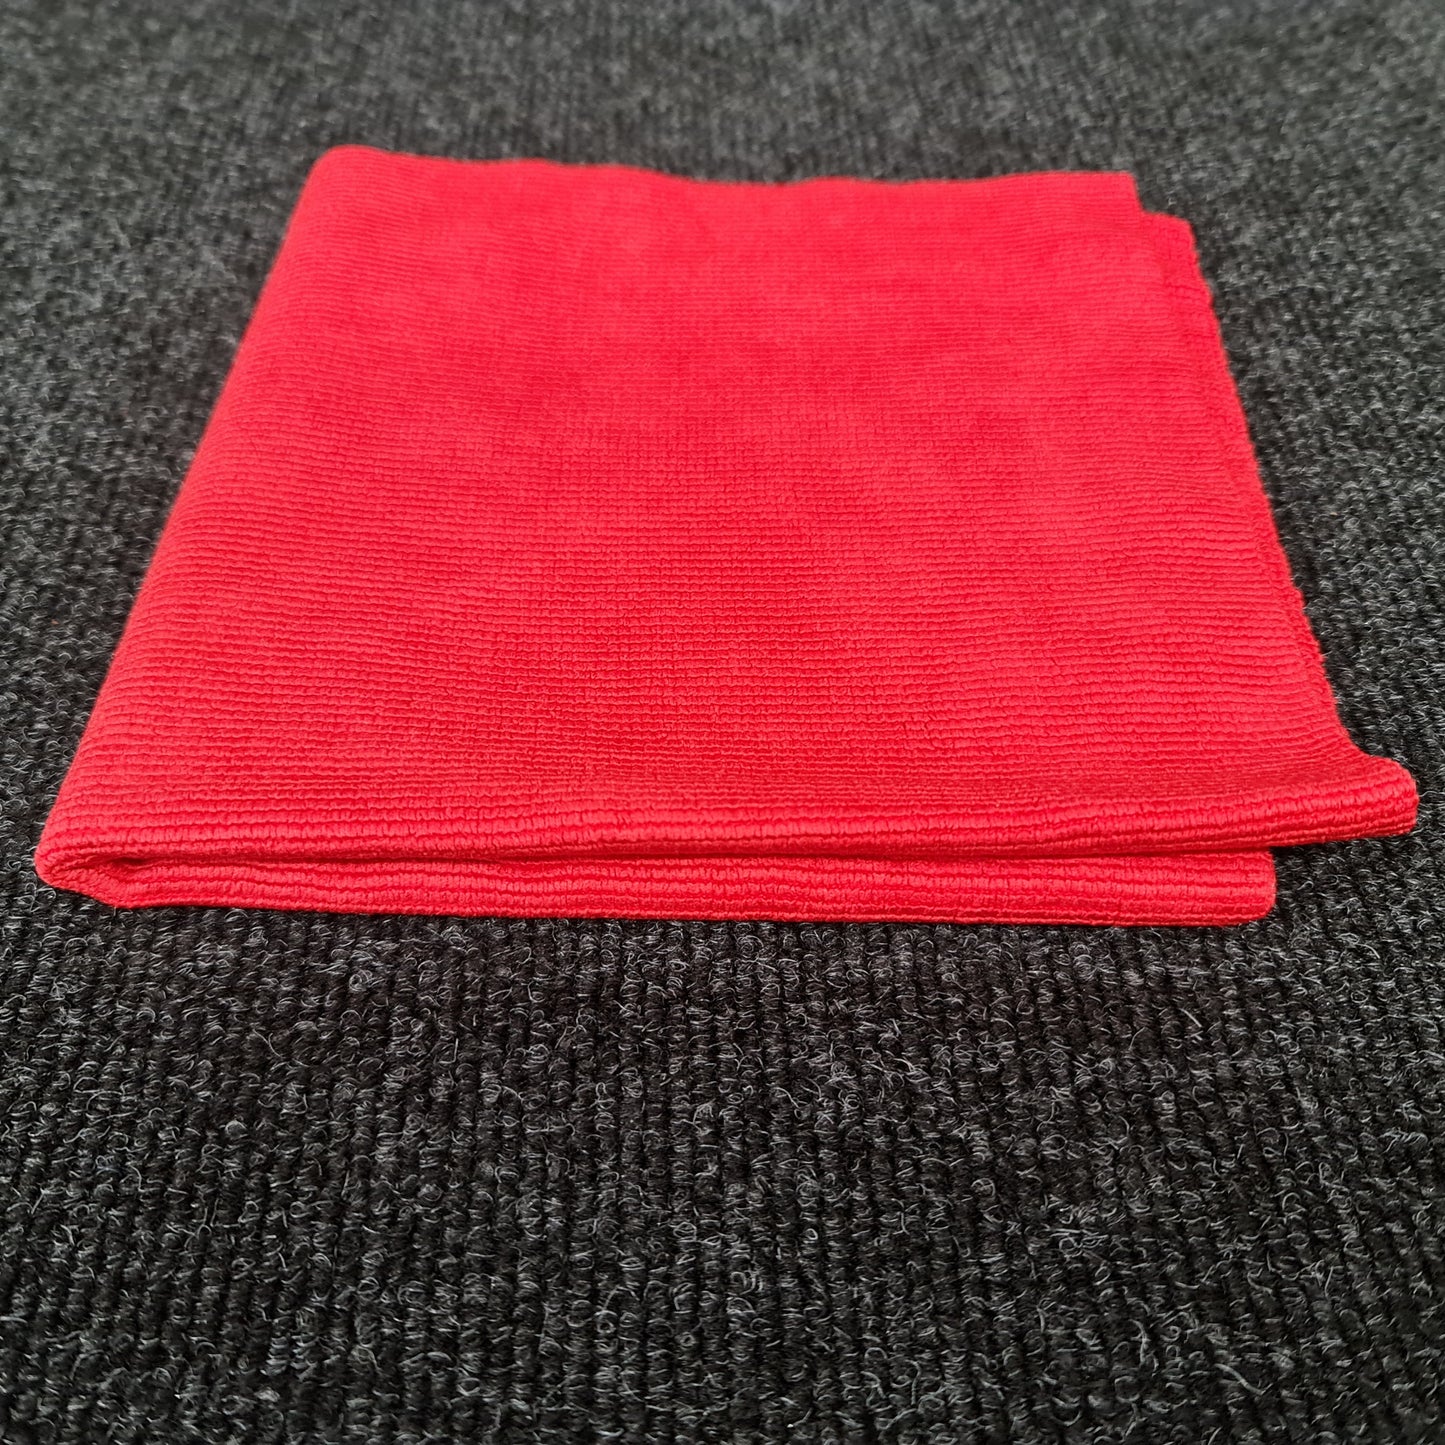 Edgeless Pearl Knit Buffing Cloth